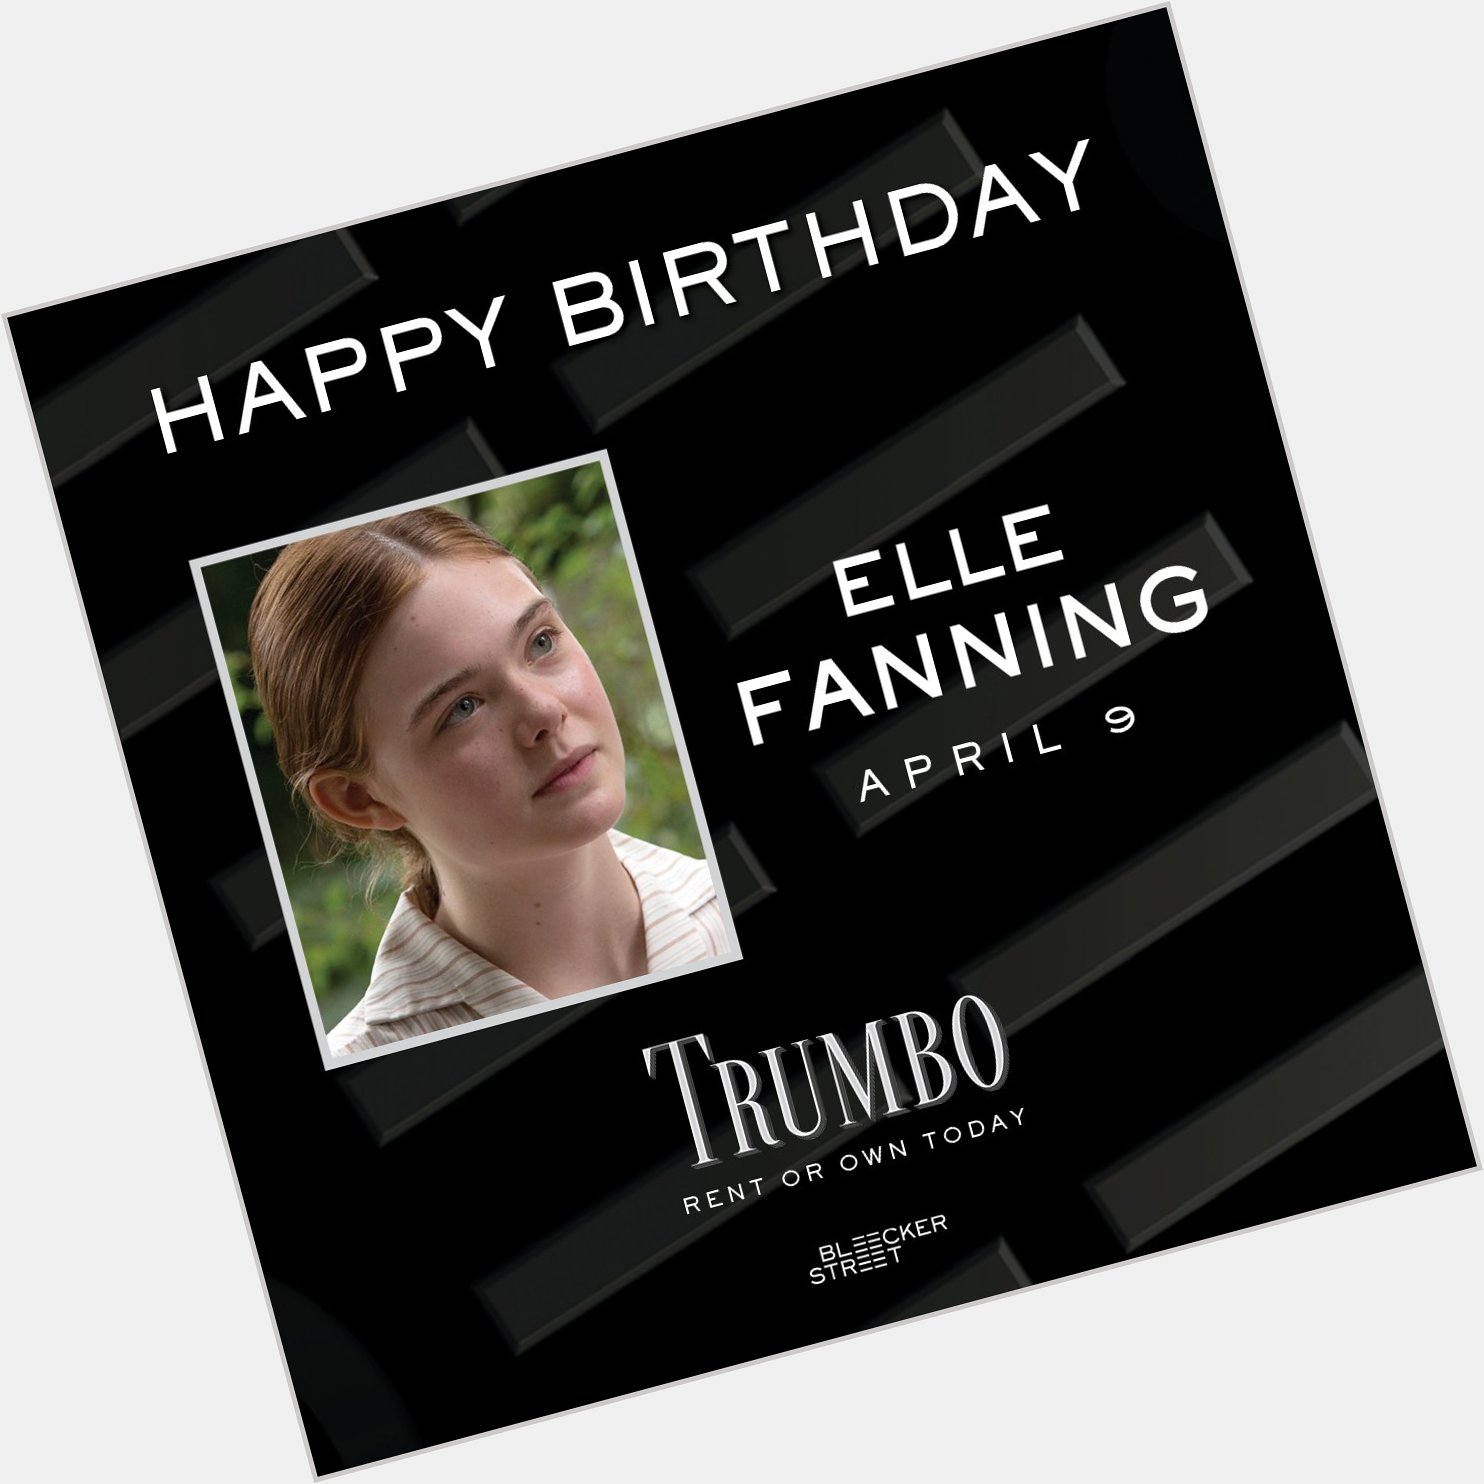 Happy birthday to star Elle Fanning!
Rent or own TRUMBO today at  